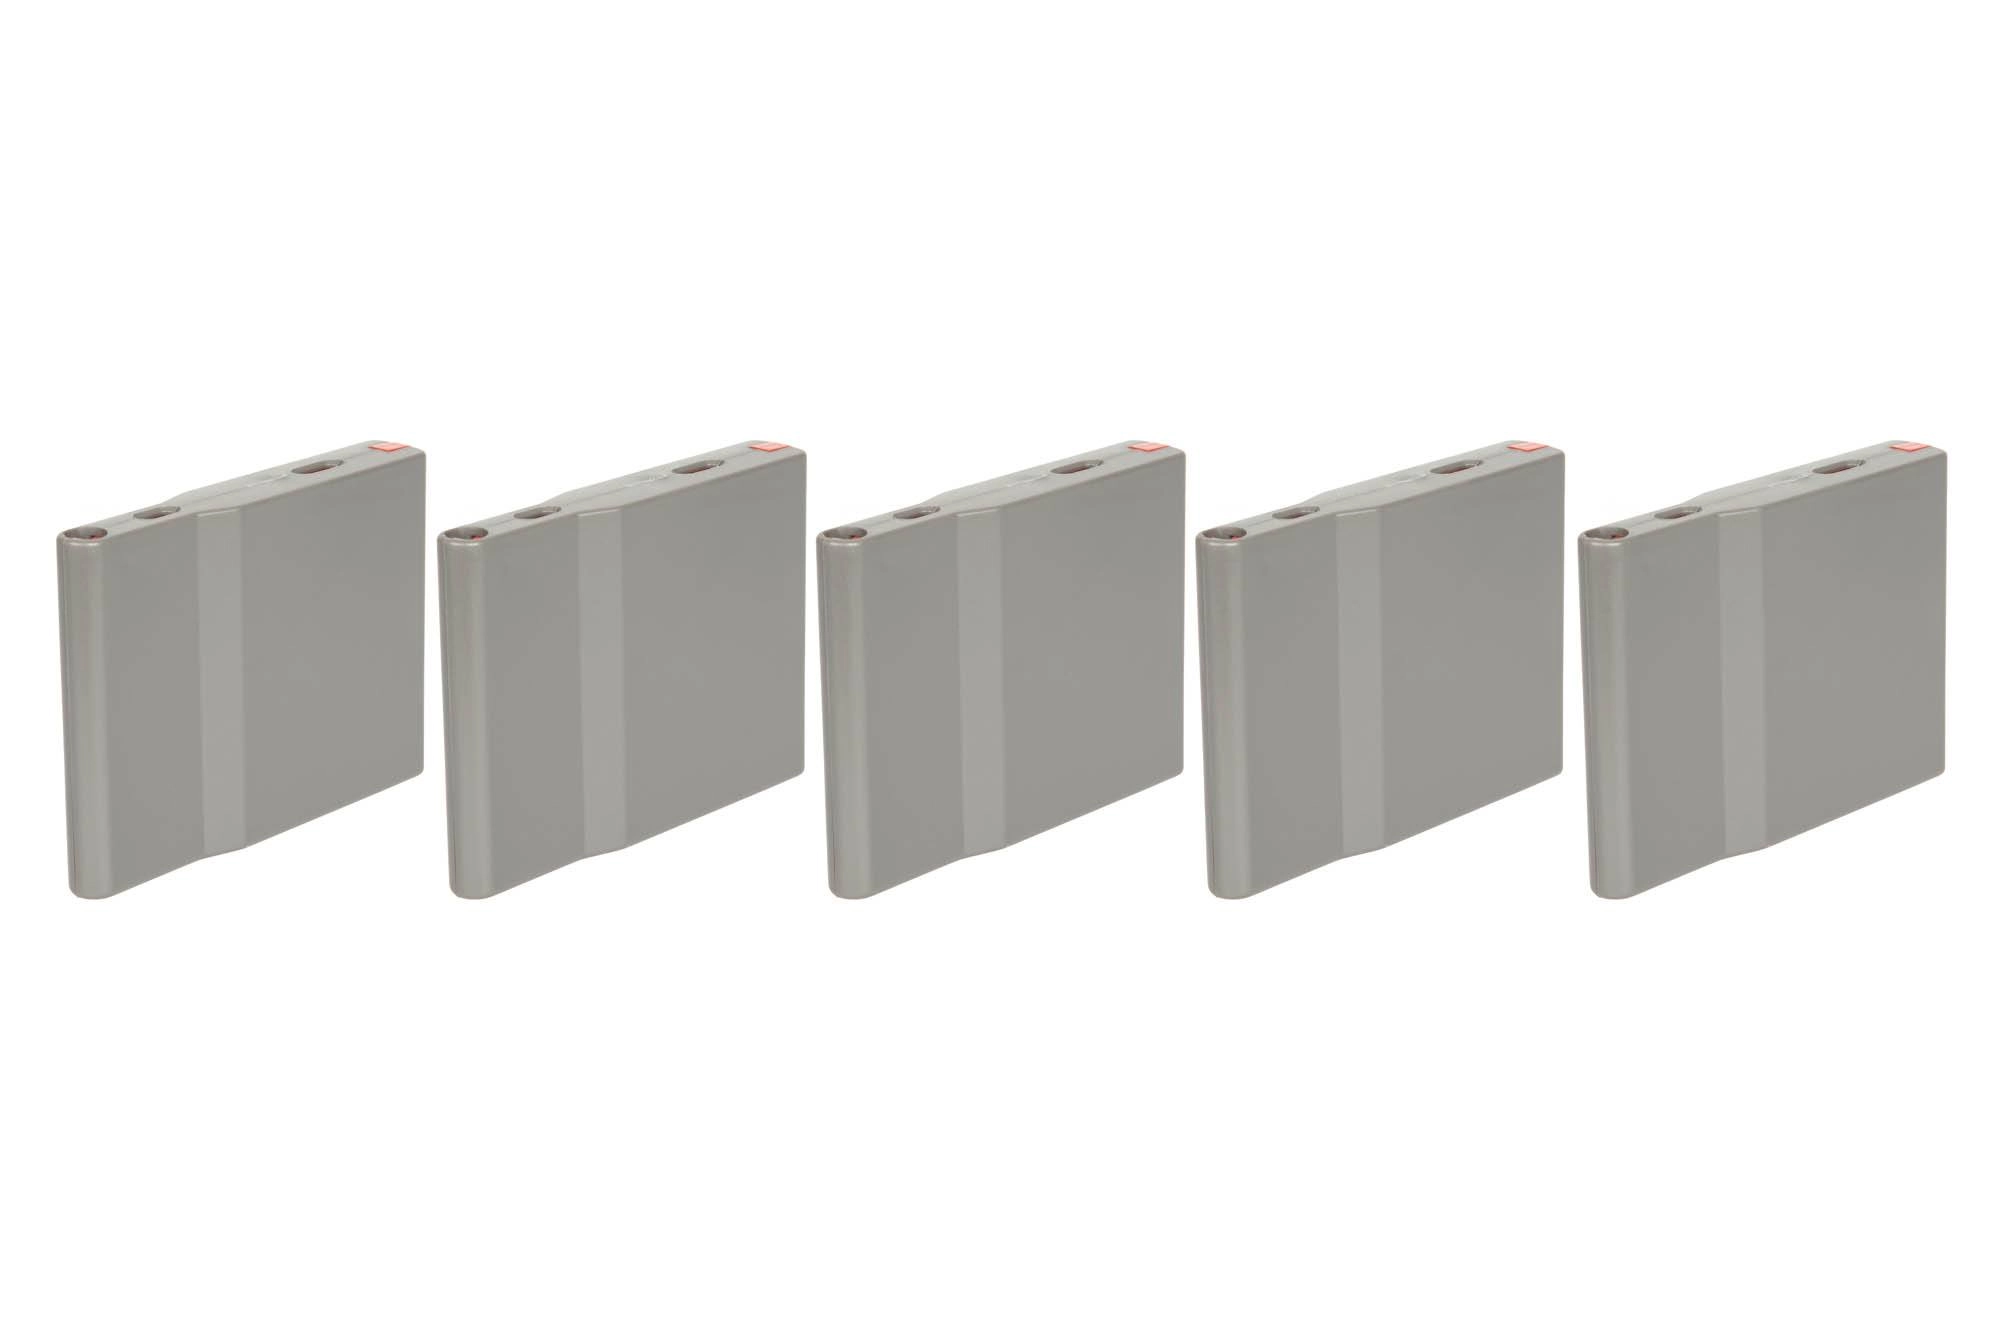 25 BBs polymer magazines for SRS replicas set of 5 - Wolf Grey